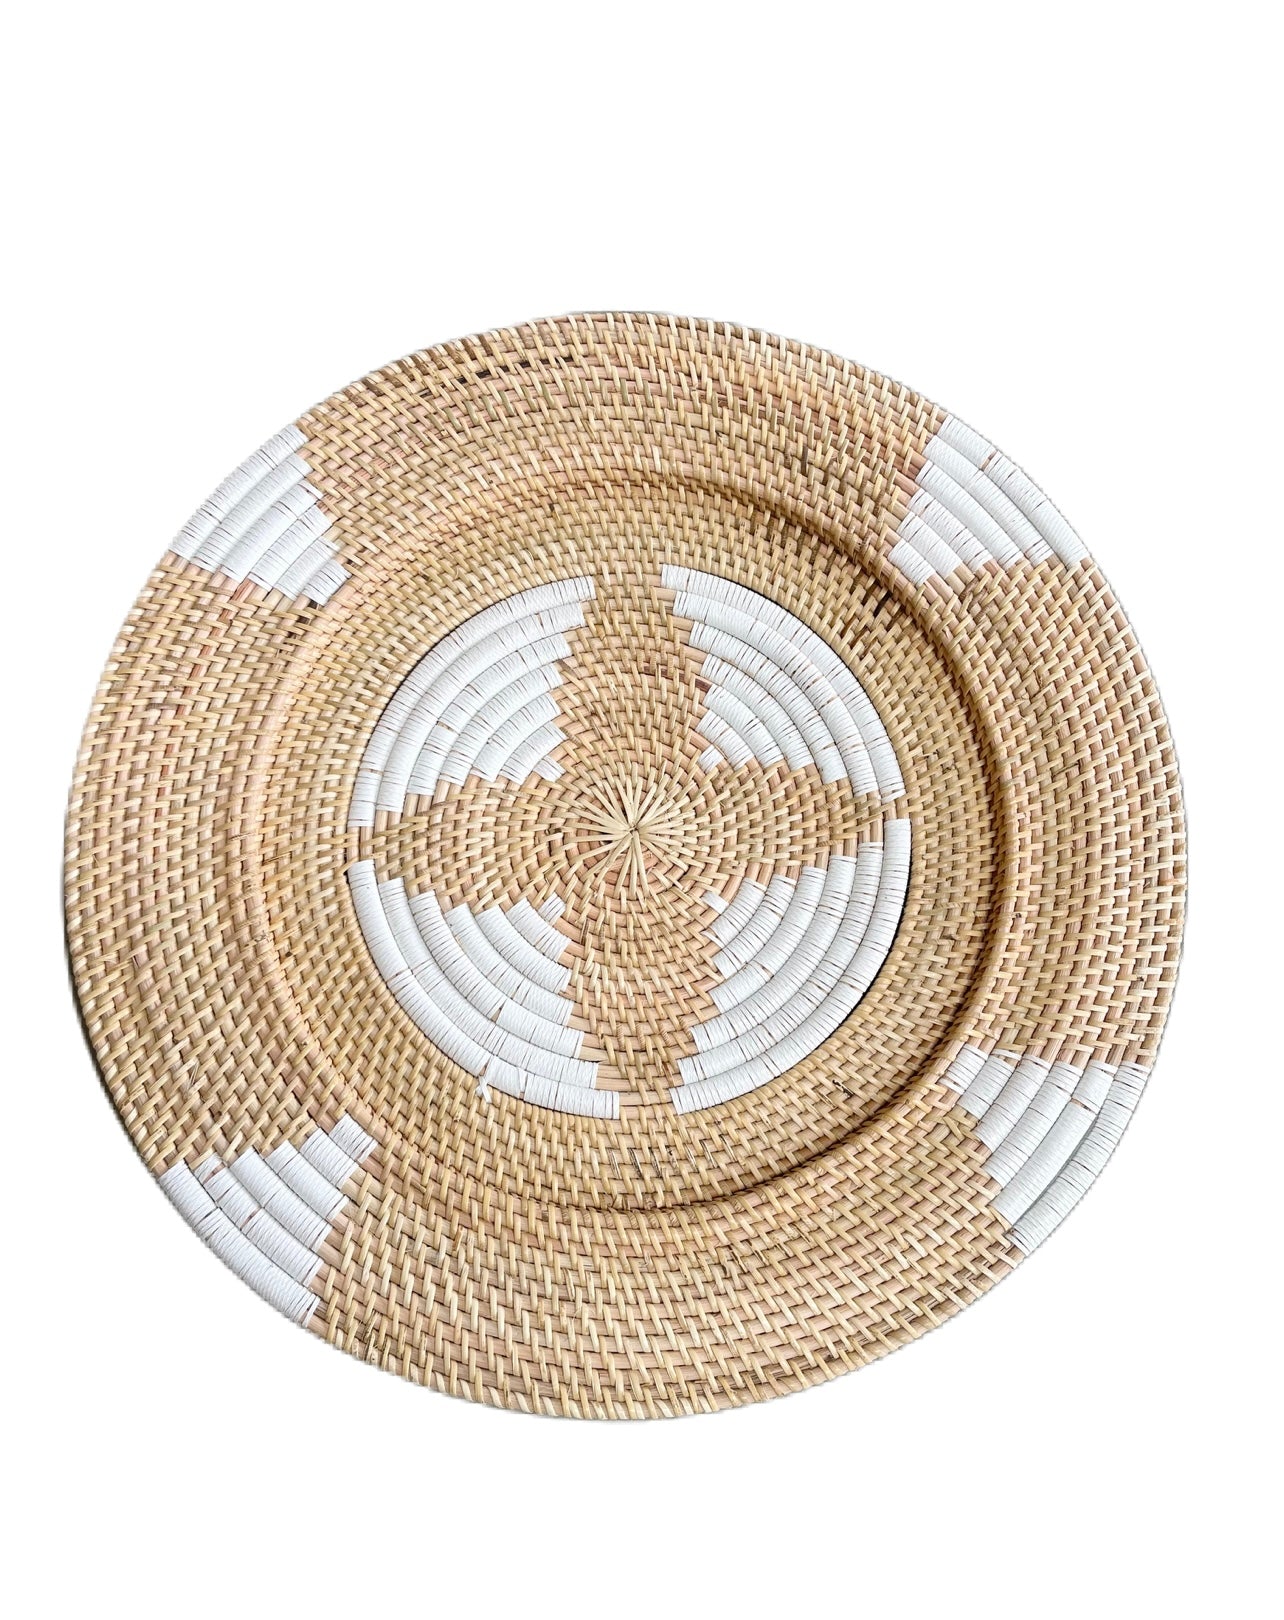 Hand woven wall plates